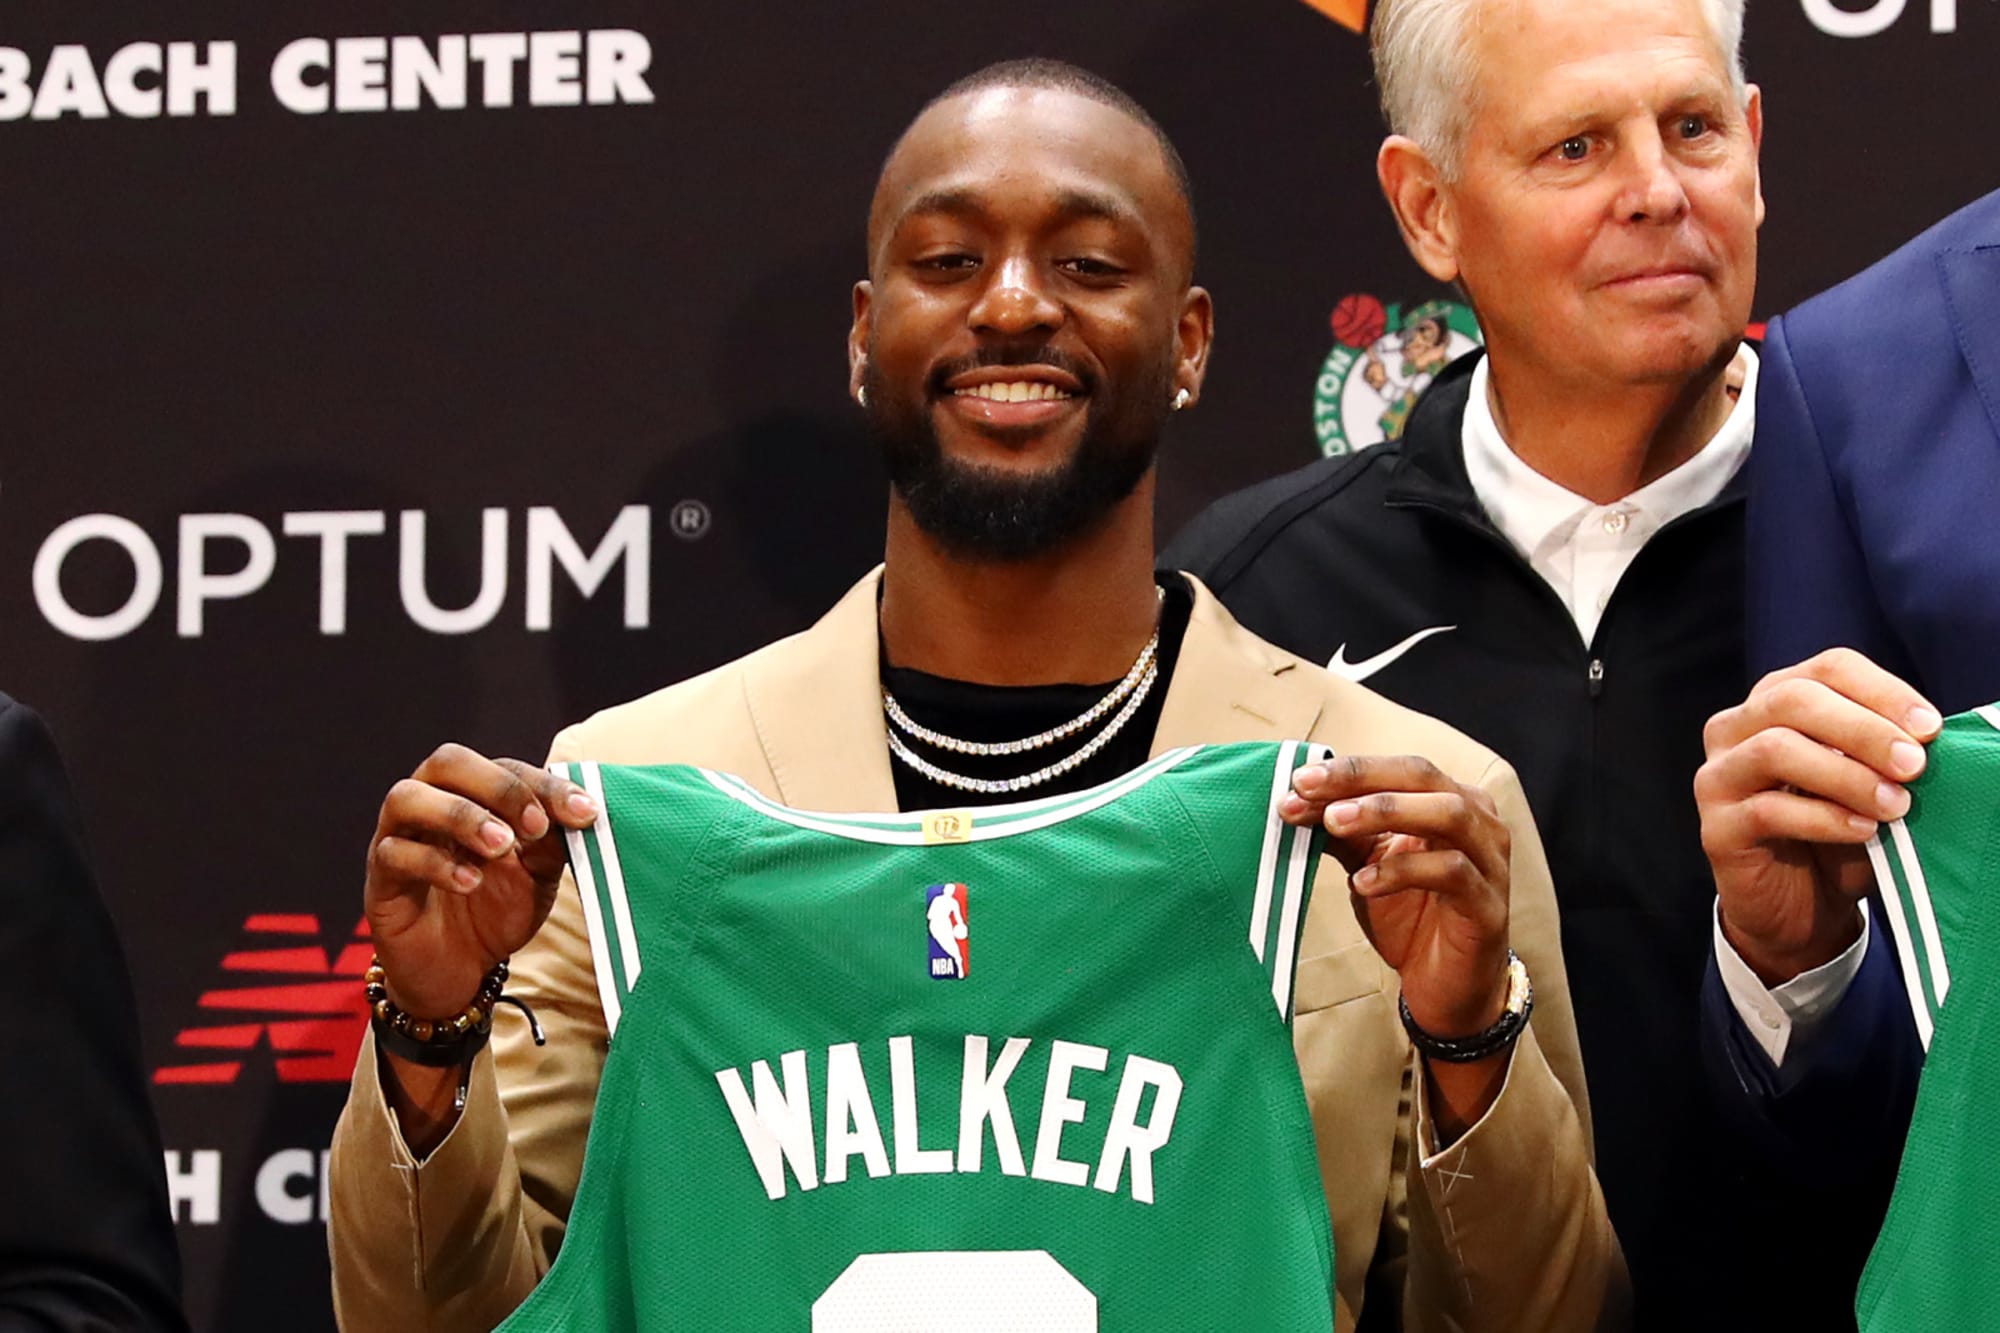 Kemba Walker leads Celtics to impressive win over the Clippers and